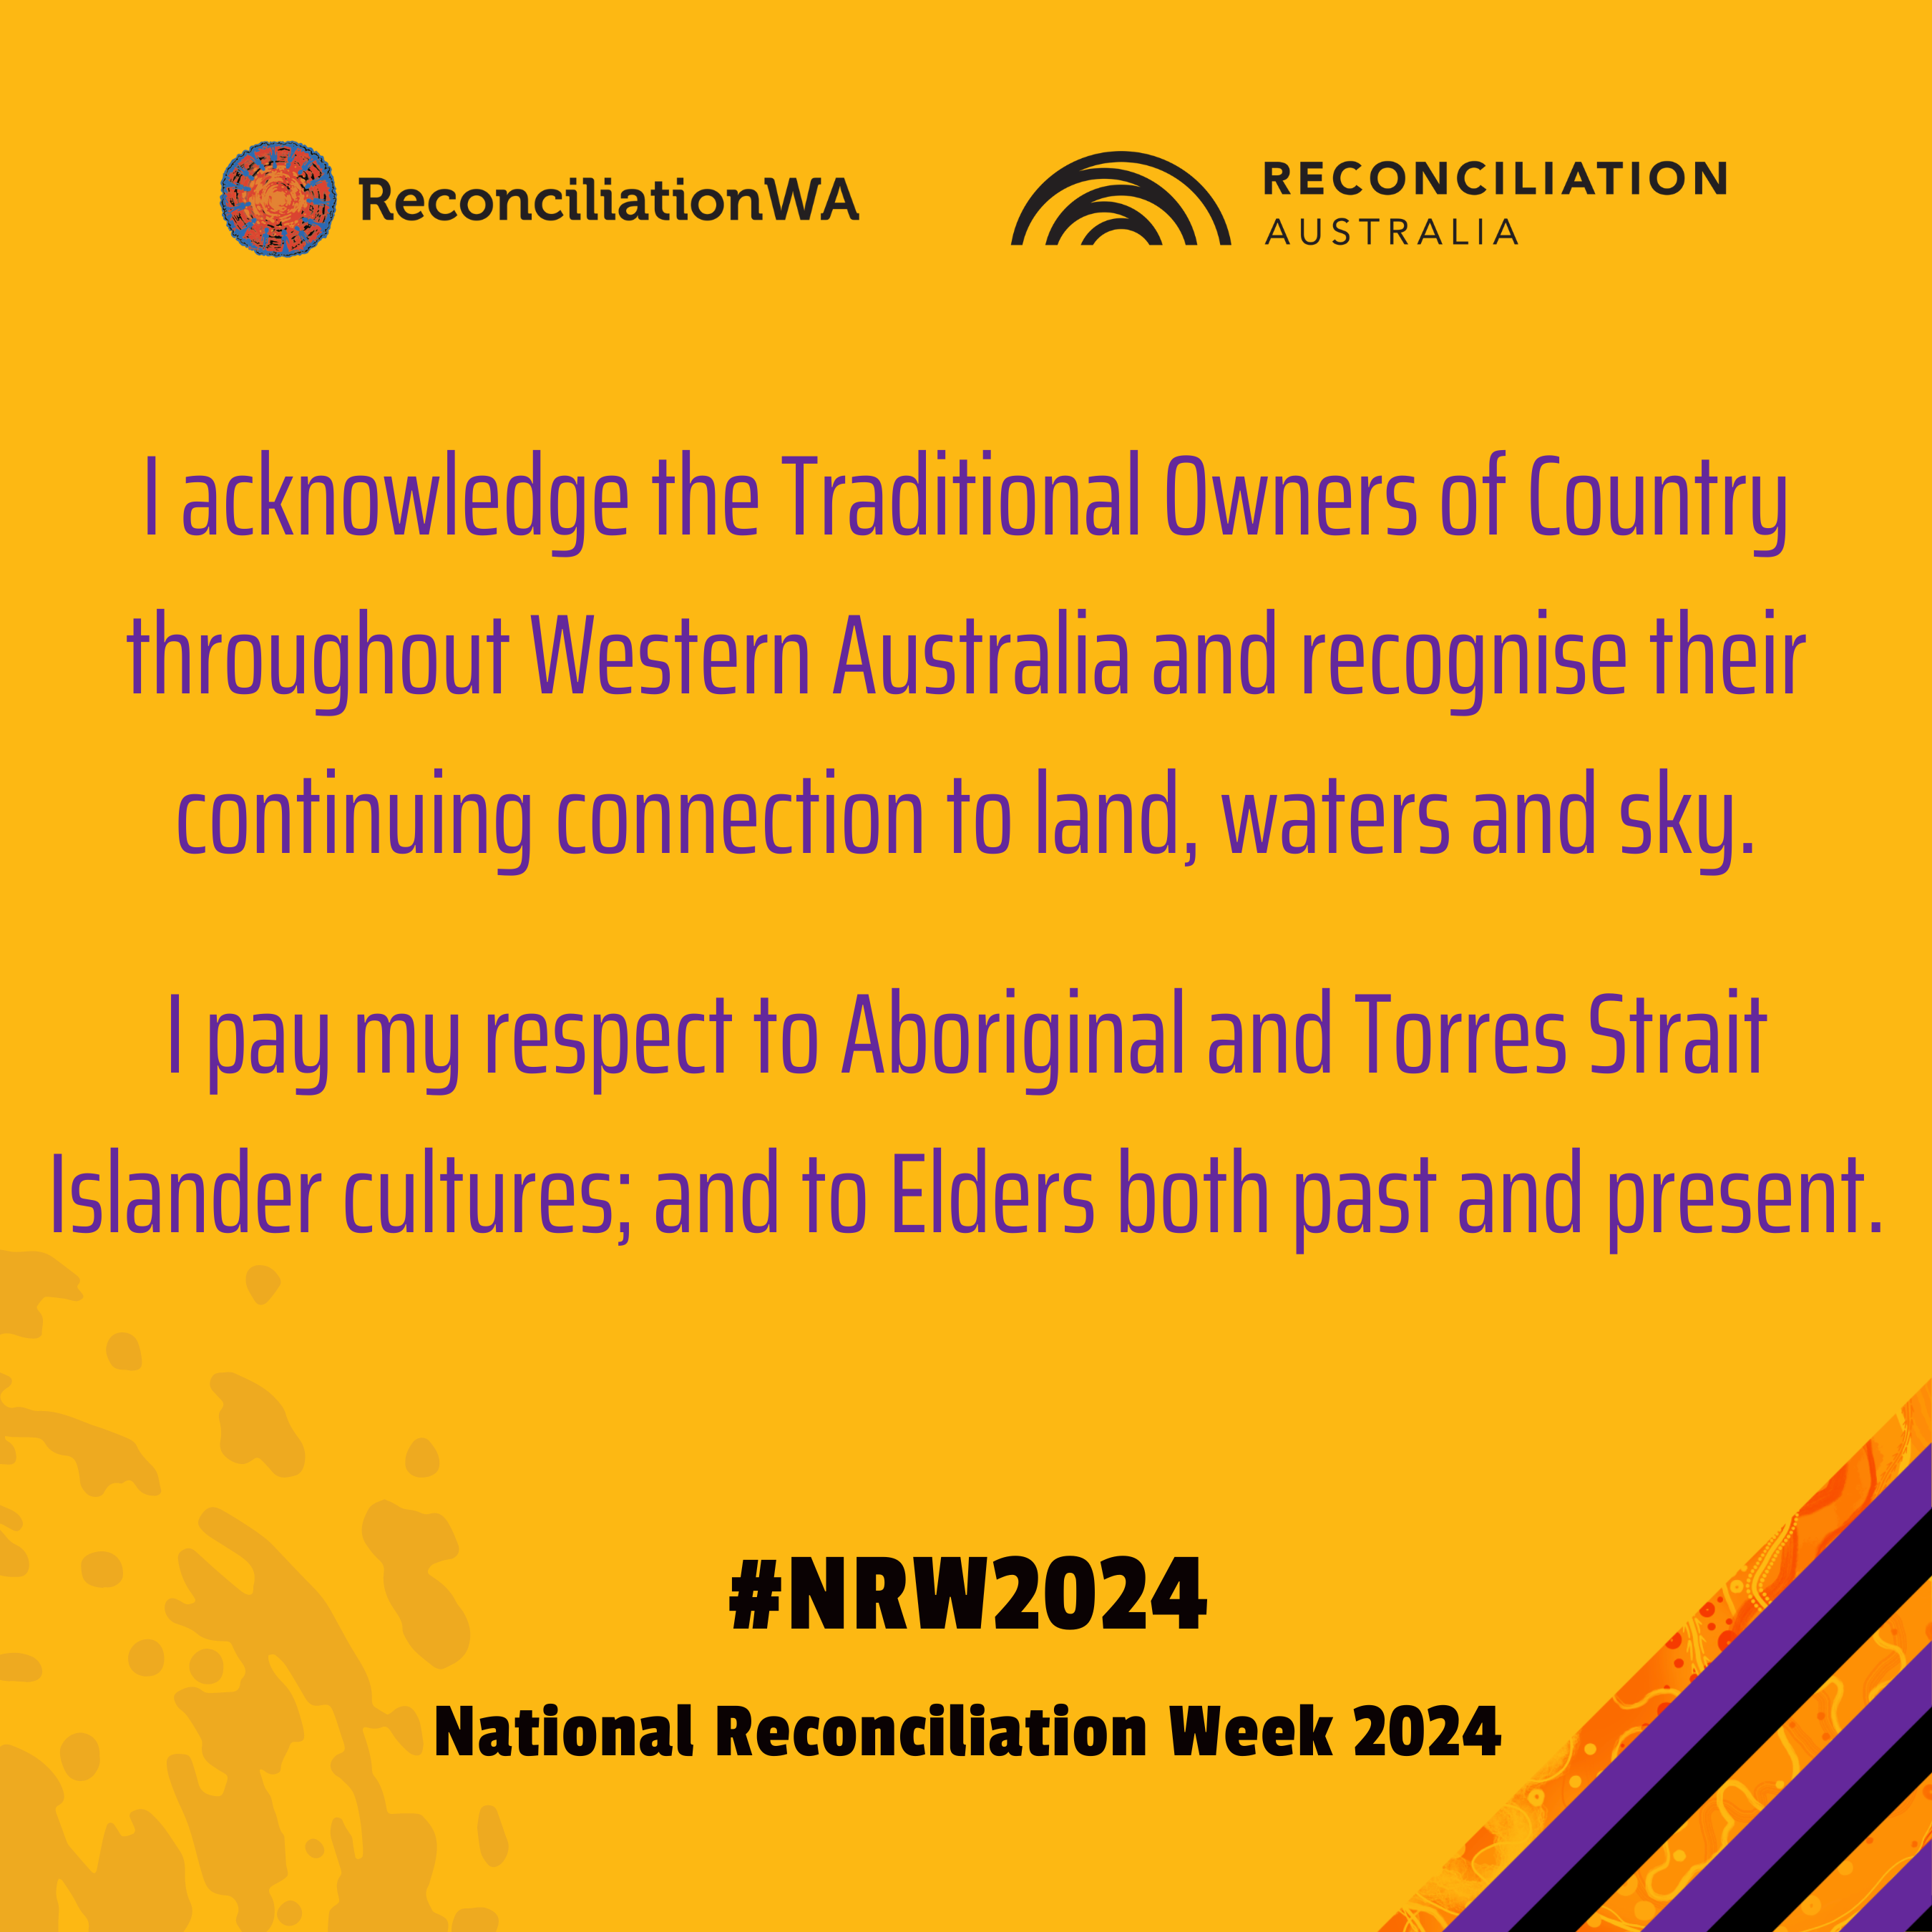 NATIONAL RECONCILIATION WEEK 2024